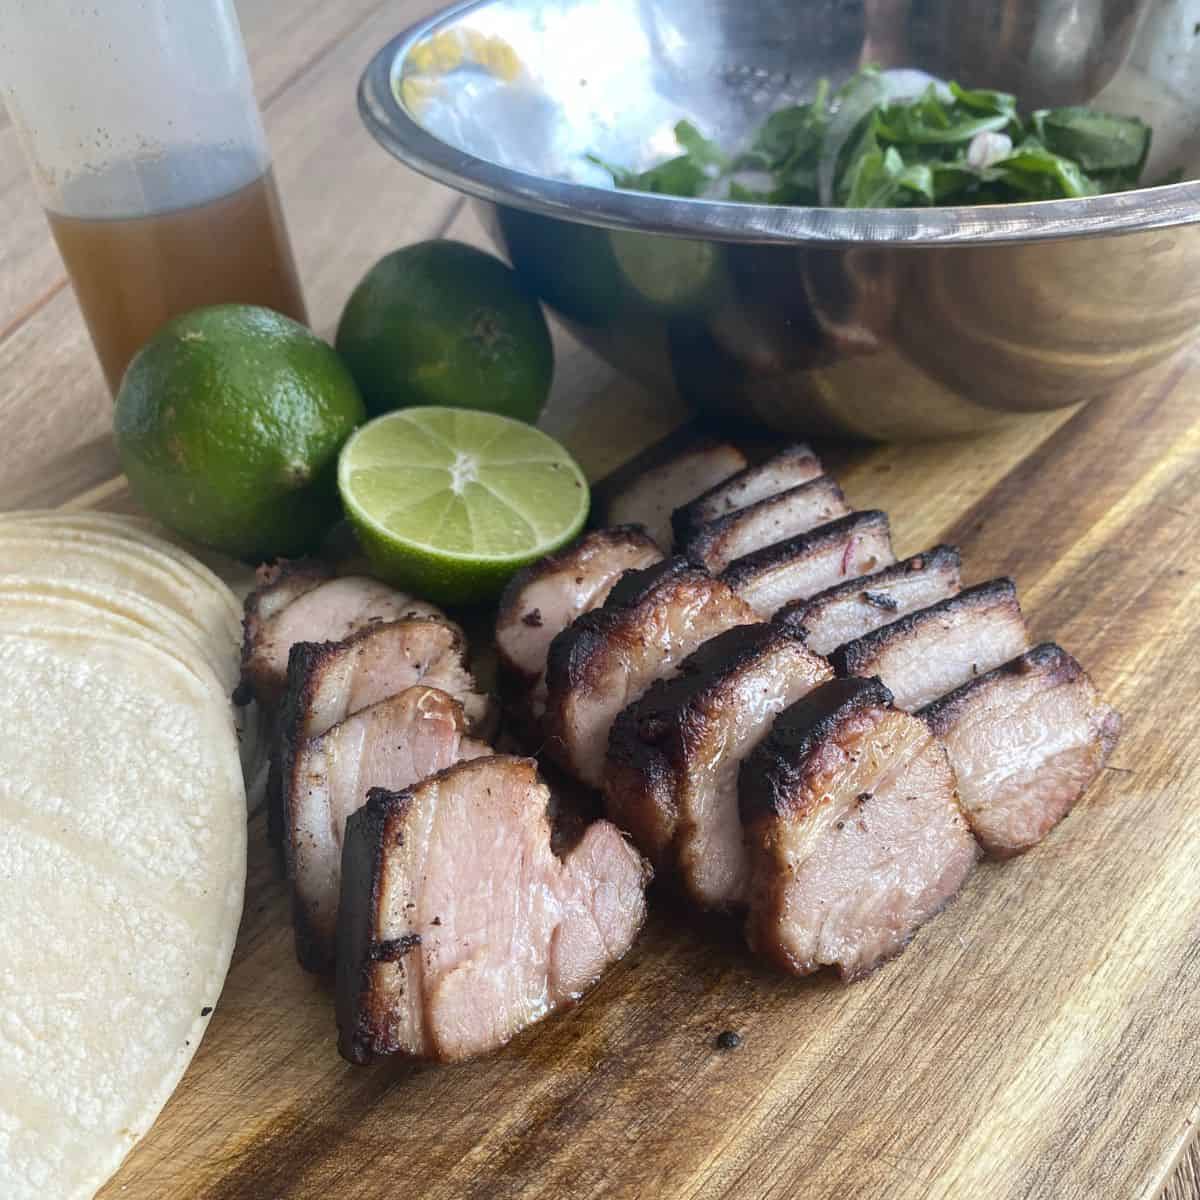 Sliced Pork Belly on a wood board with tortillas, lime, chipotle oil and a stainless steel mixing